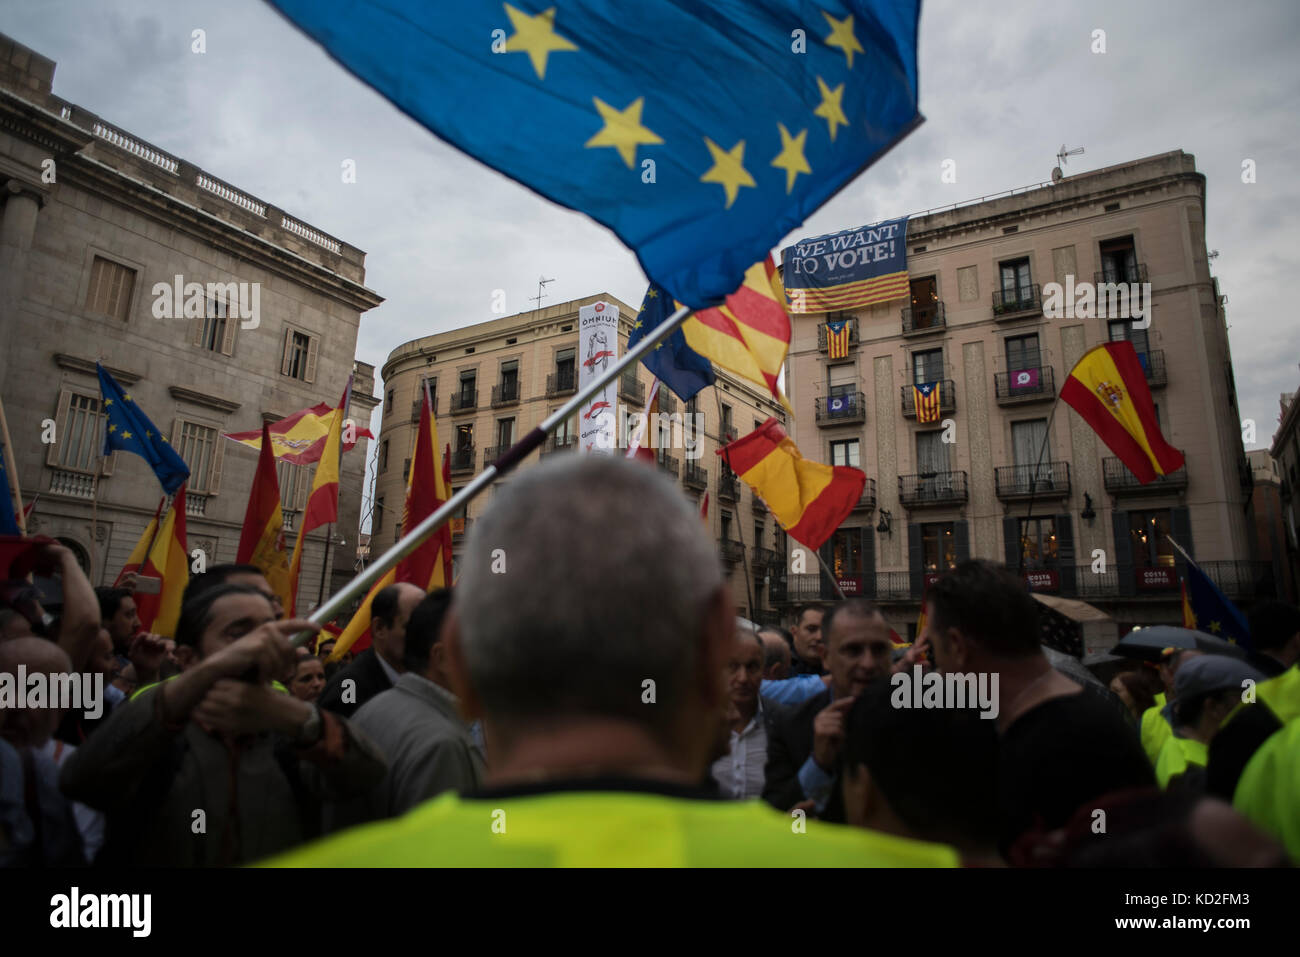 Concentration anti-independence in the Sant Jaume square, Barcelona. Credit: Alamy / Carles Desfilis Stock Photo